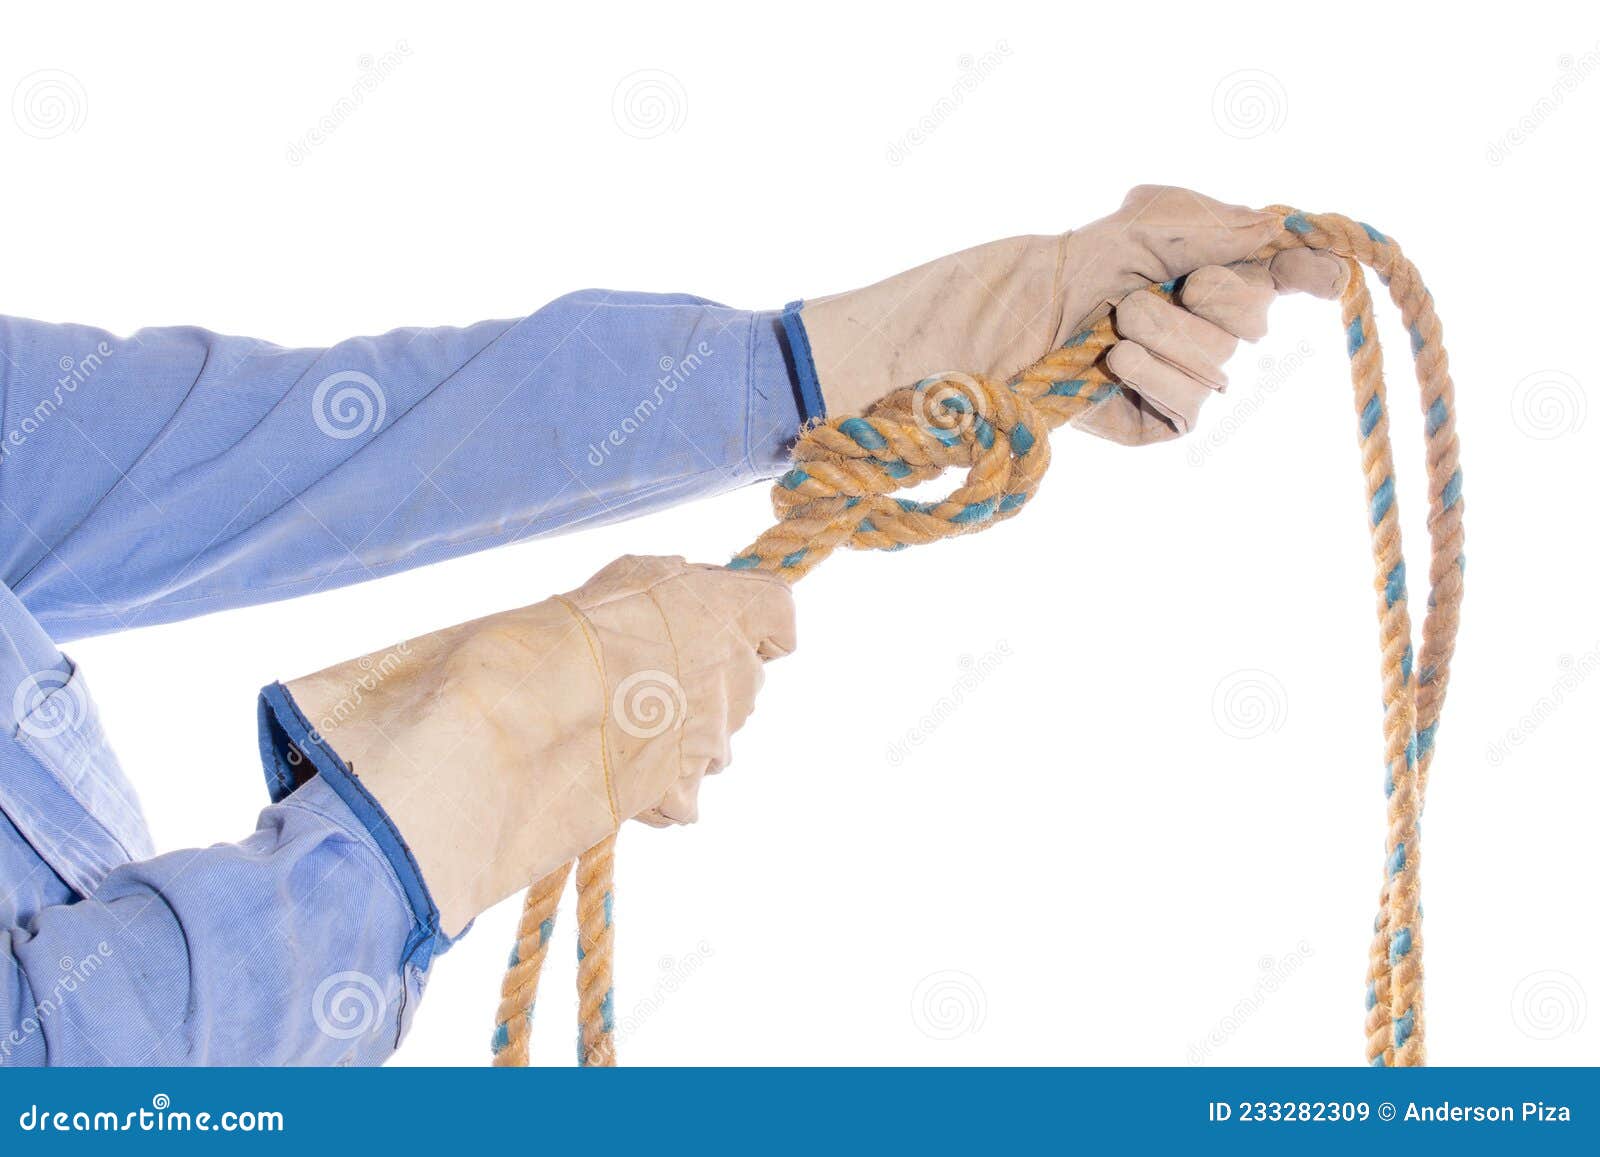 Two Hands Tying a Simple Knot To a Rope, Isolated on White Background.  Hands Wearing Gloves Tightening an Eight Knot Stock Image - Image of white,  eight: 233282309